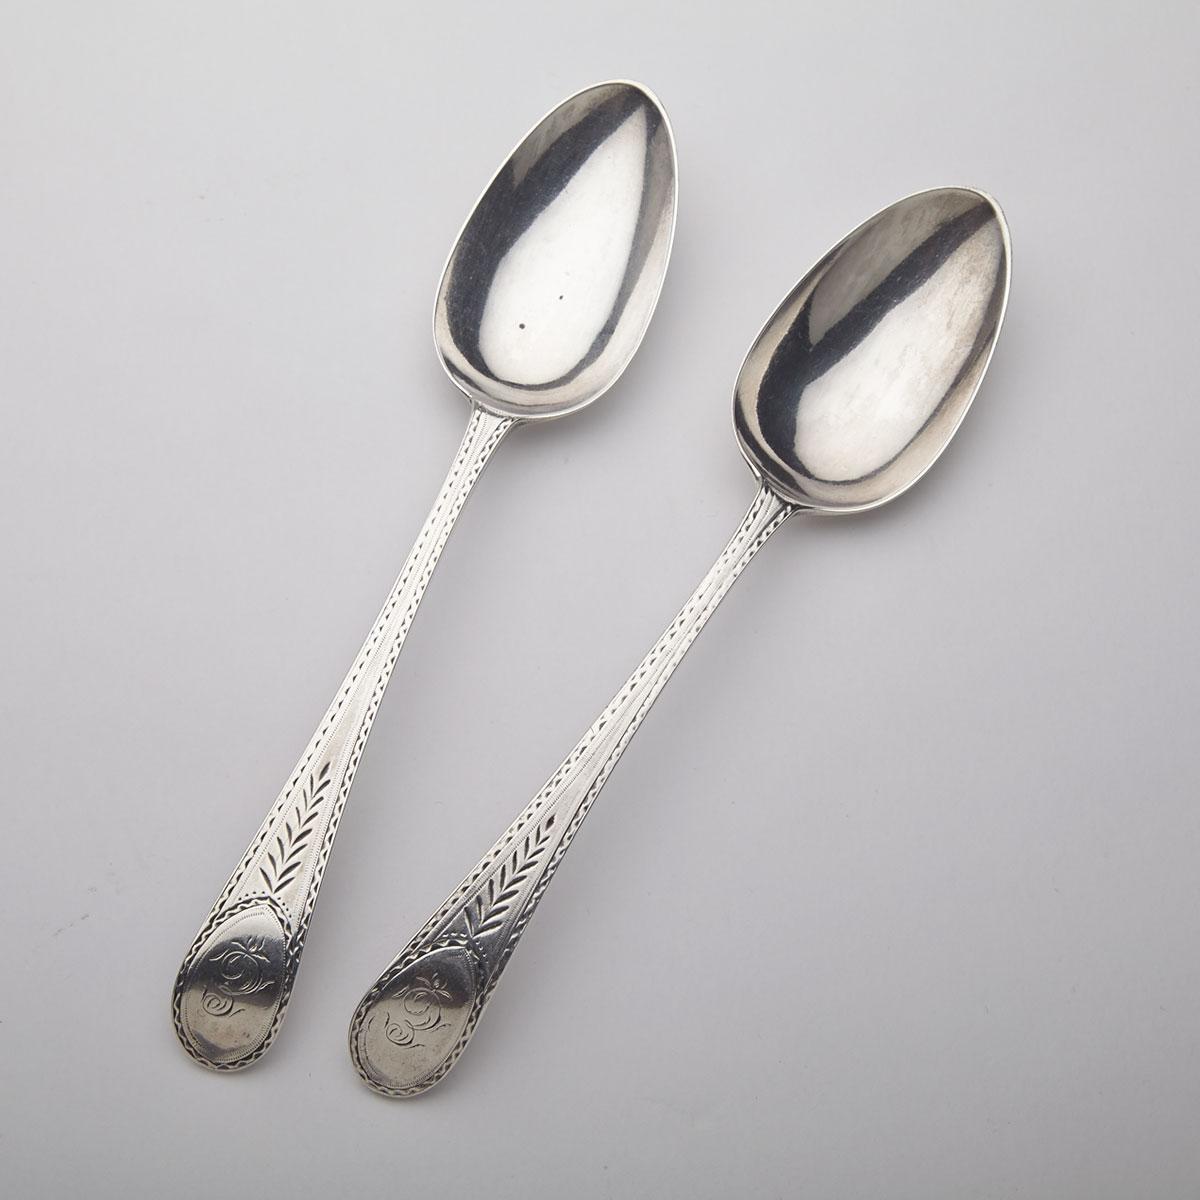 Pair of George III Silver Bright-Cut Engraved Old English Pattern Table Spoons, Stephen Adams, London, 1783